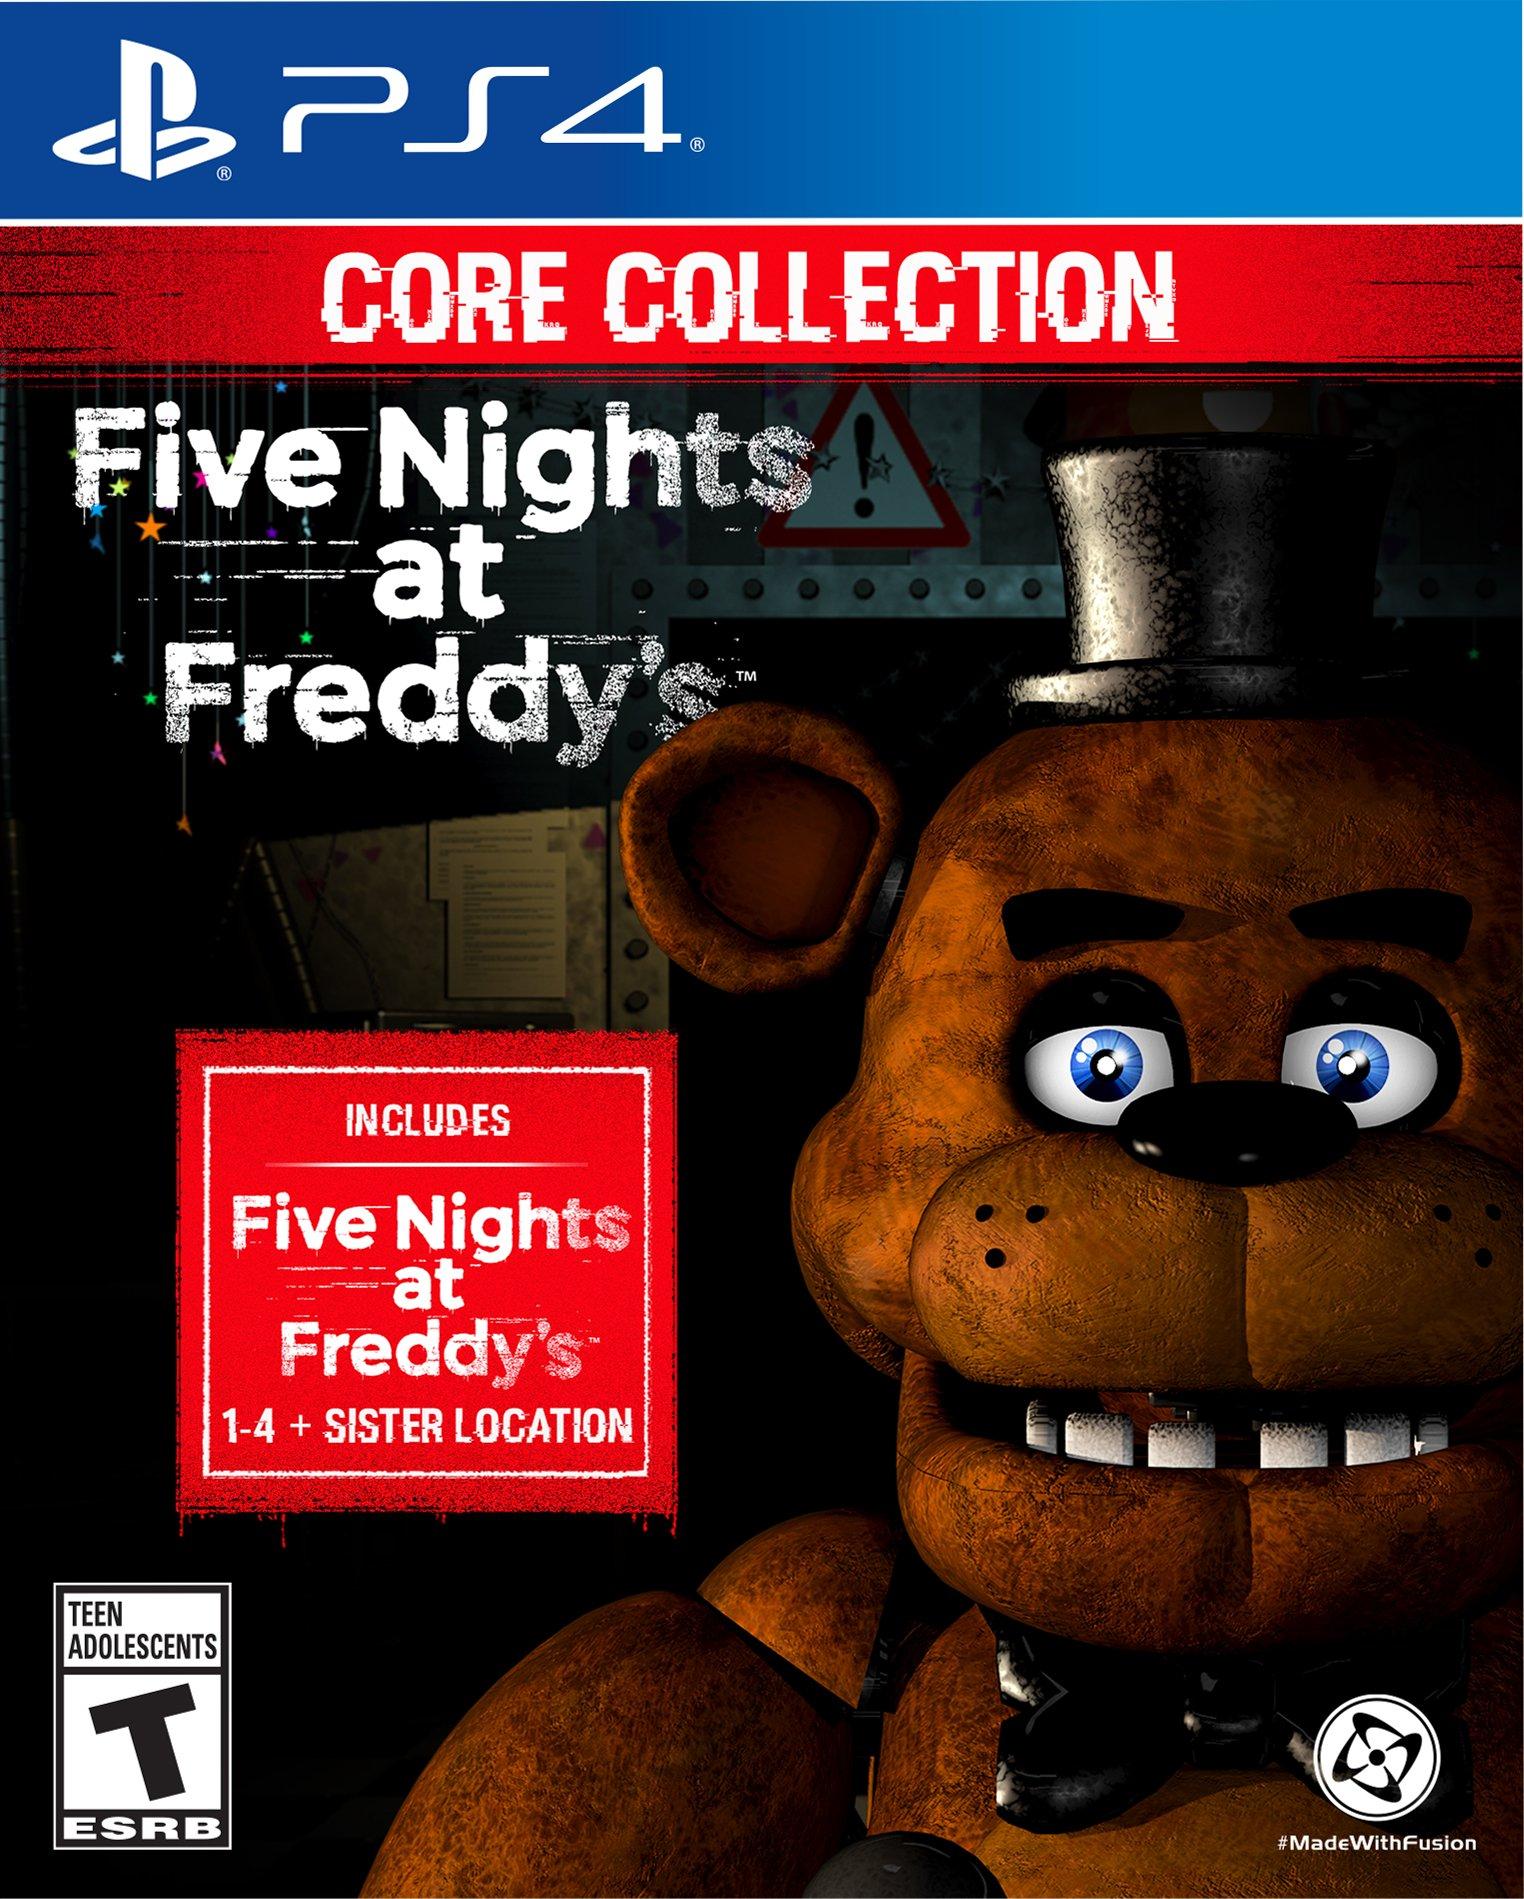 Five Nights at Freddy's: The Core Collection – 5 Things to Know